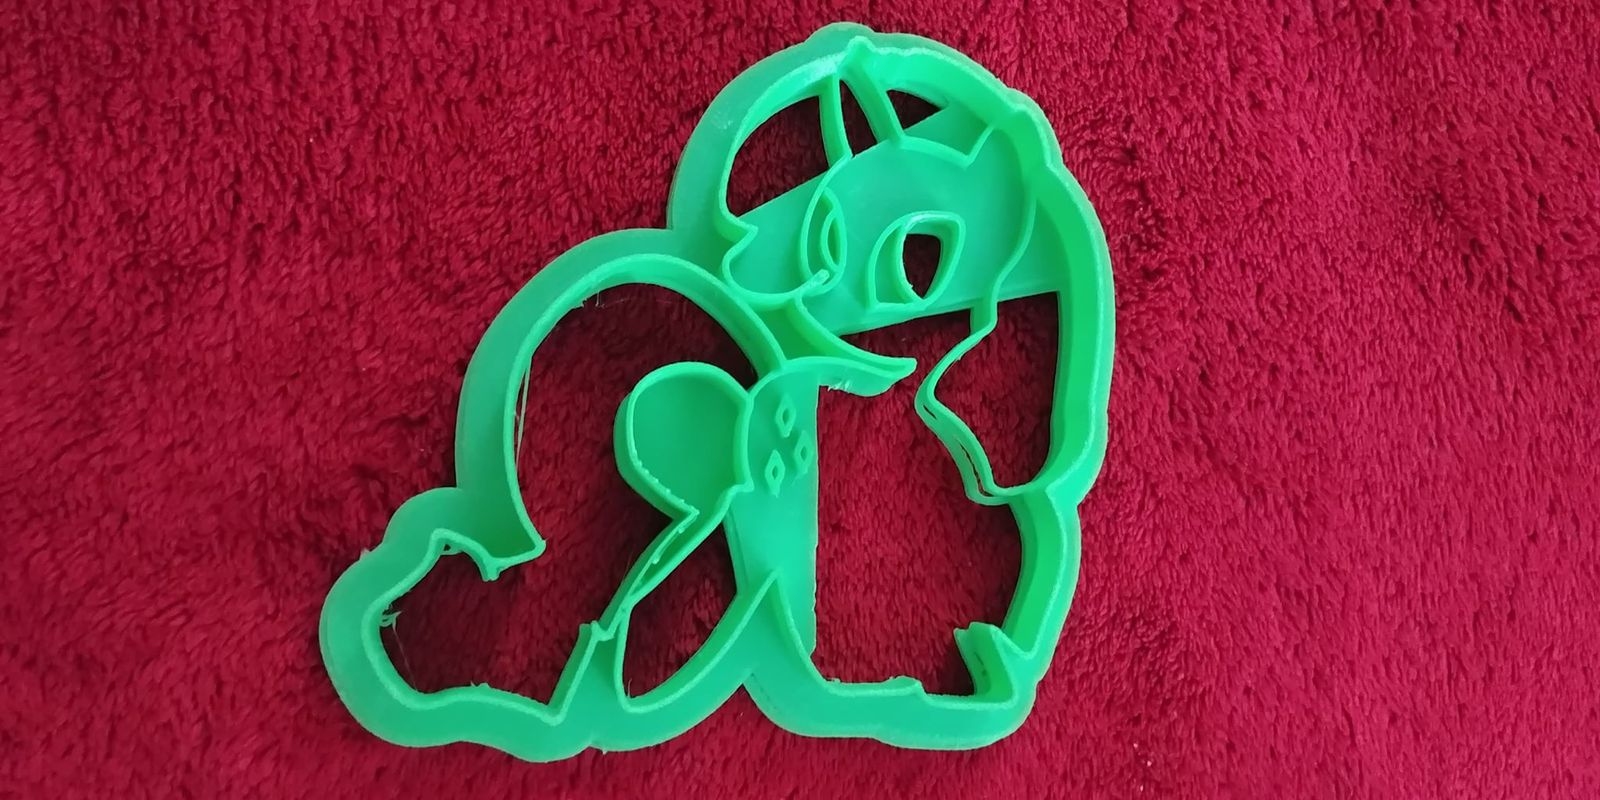 3D Printed Fan Art Cookie Cutter Inspired by MLP Rarity